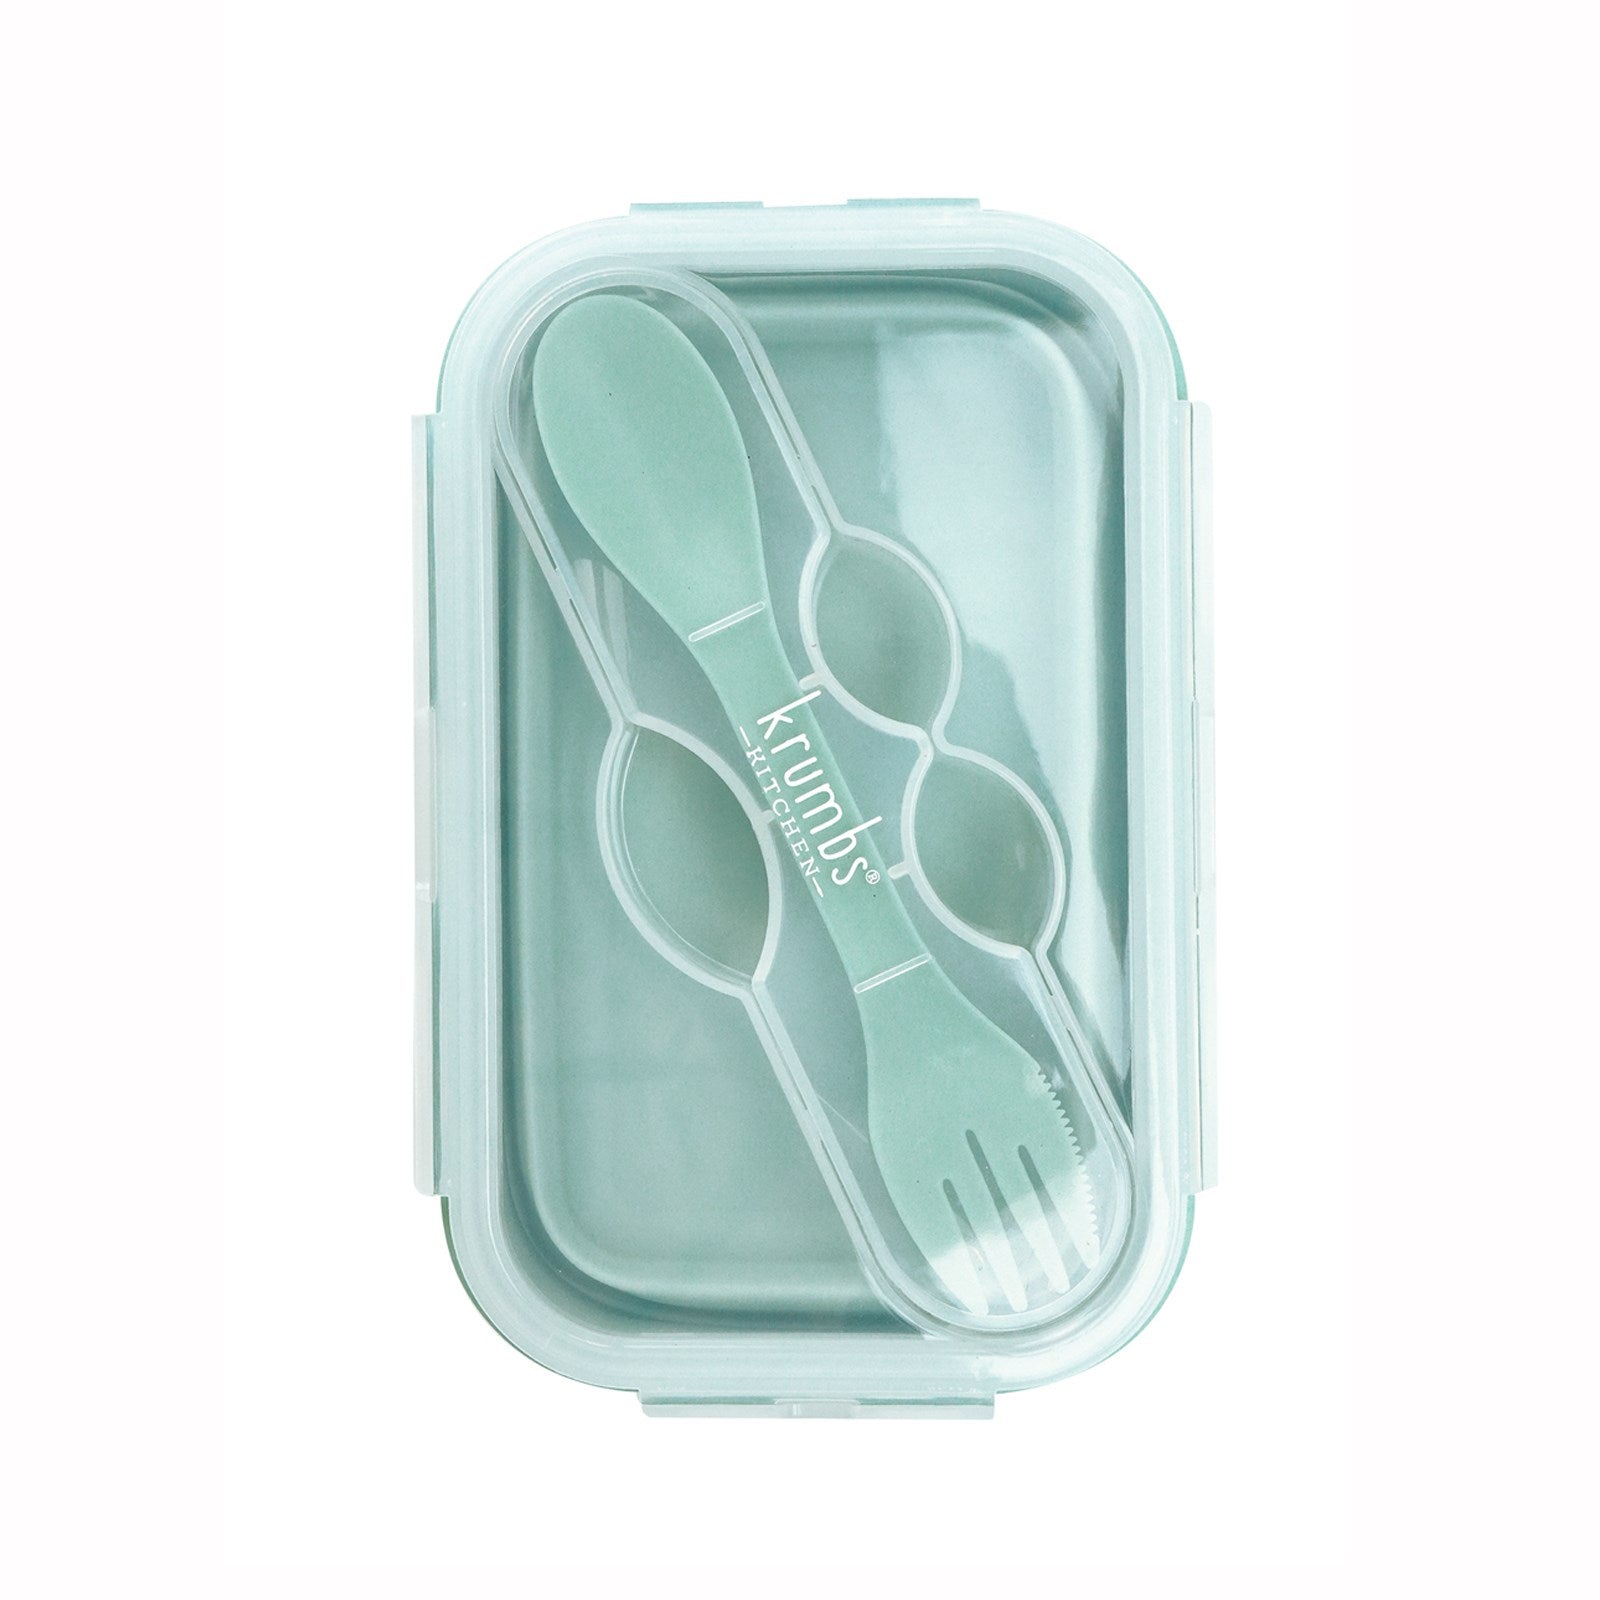 Krumbs Kitchen Essentials Silicone Lunch Container – Outlet Express